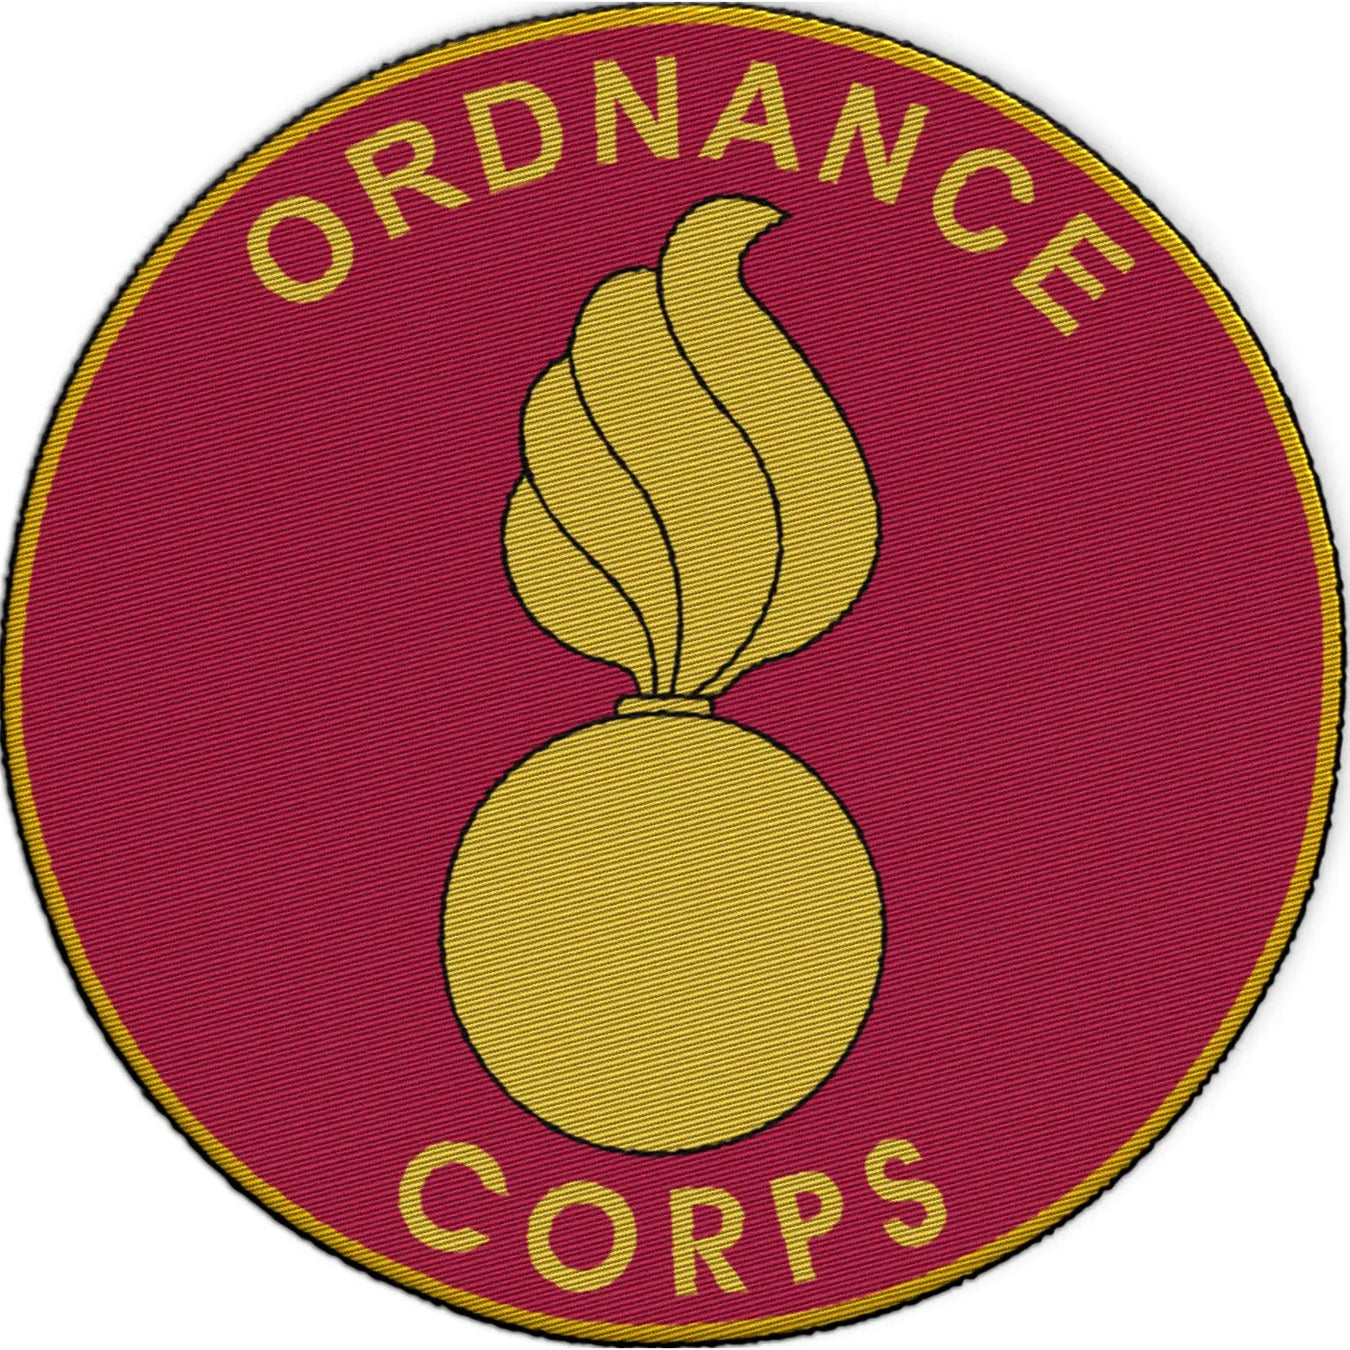 U.S. Army Ordnance Corps Patches